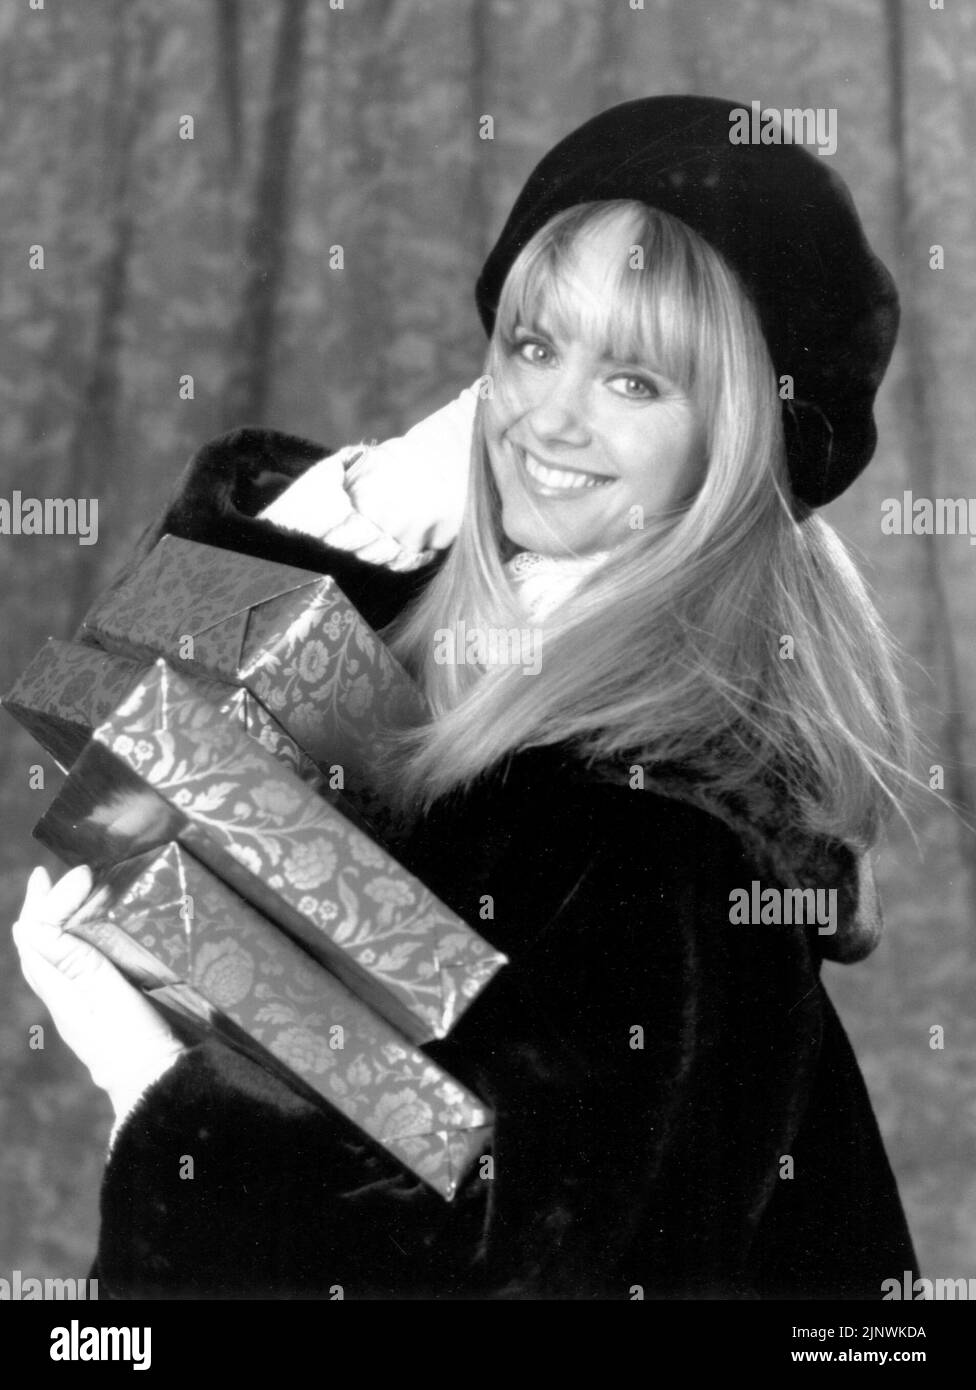 OLIVIA NEWTON-JOHN in A MOM FOR CHRISTMAS (1990), directed by GEORGE T. MILLER. Credit: WALT DISNEY TELEVISION / Album Stock Photo